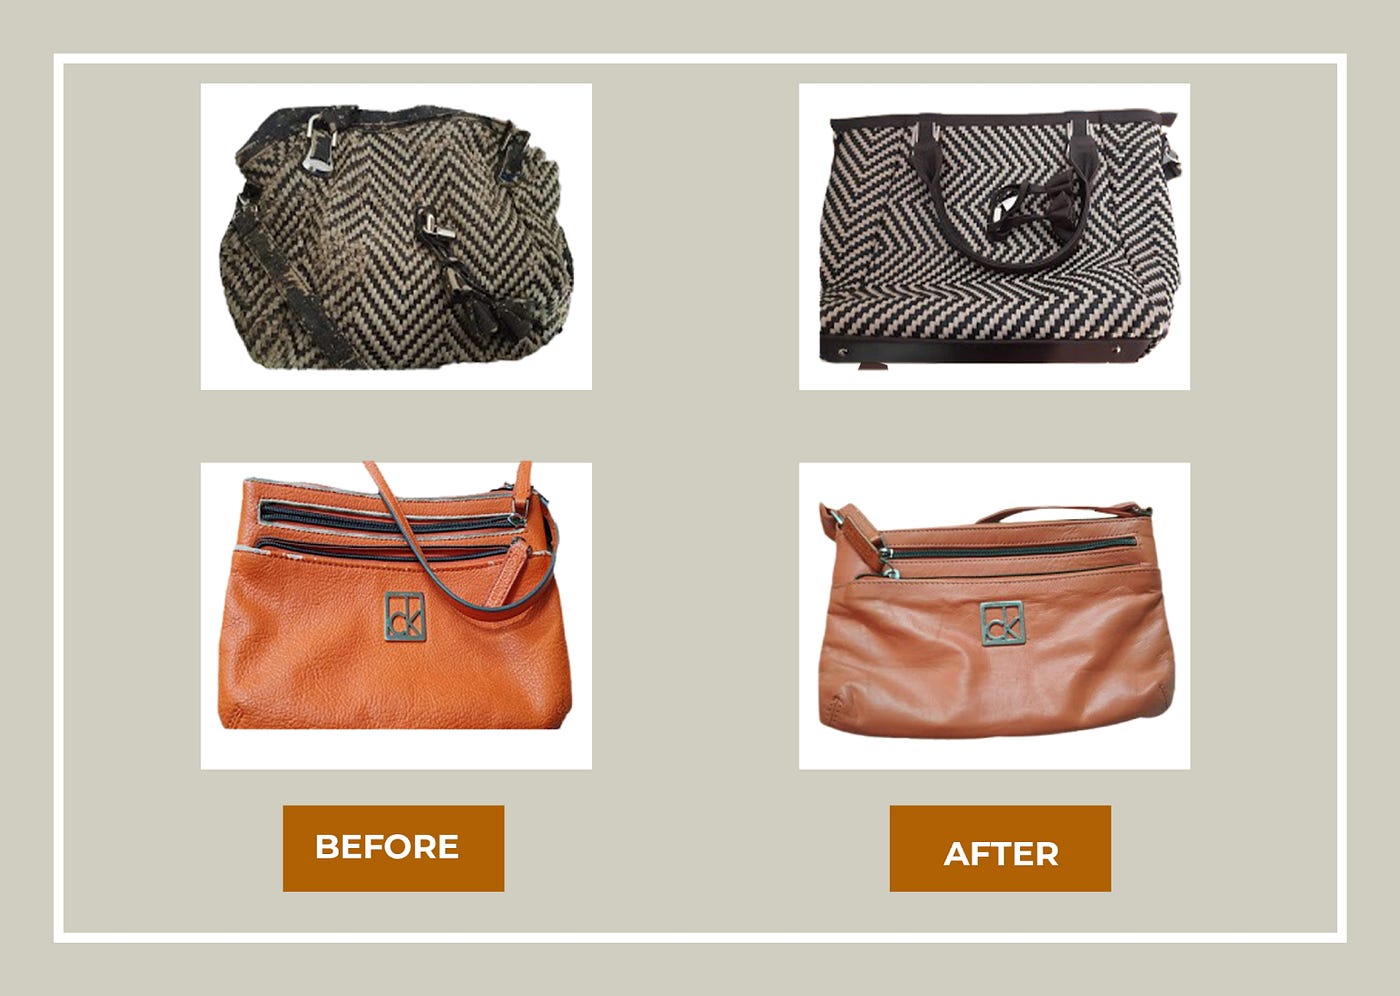 How to Recolor/Restore Leather Bags, Handbags & Purses